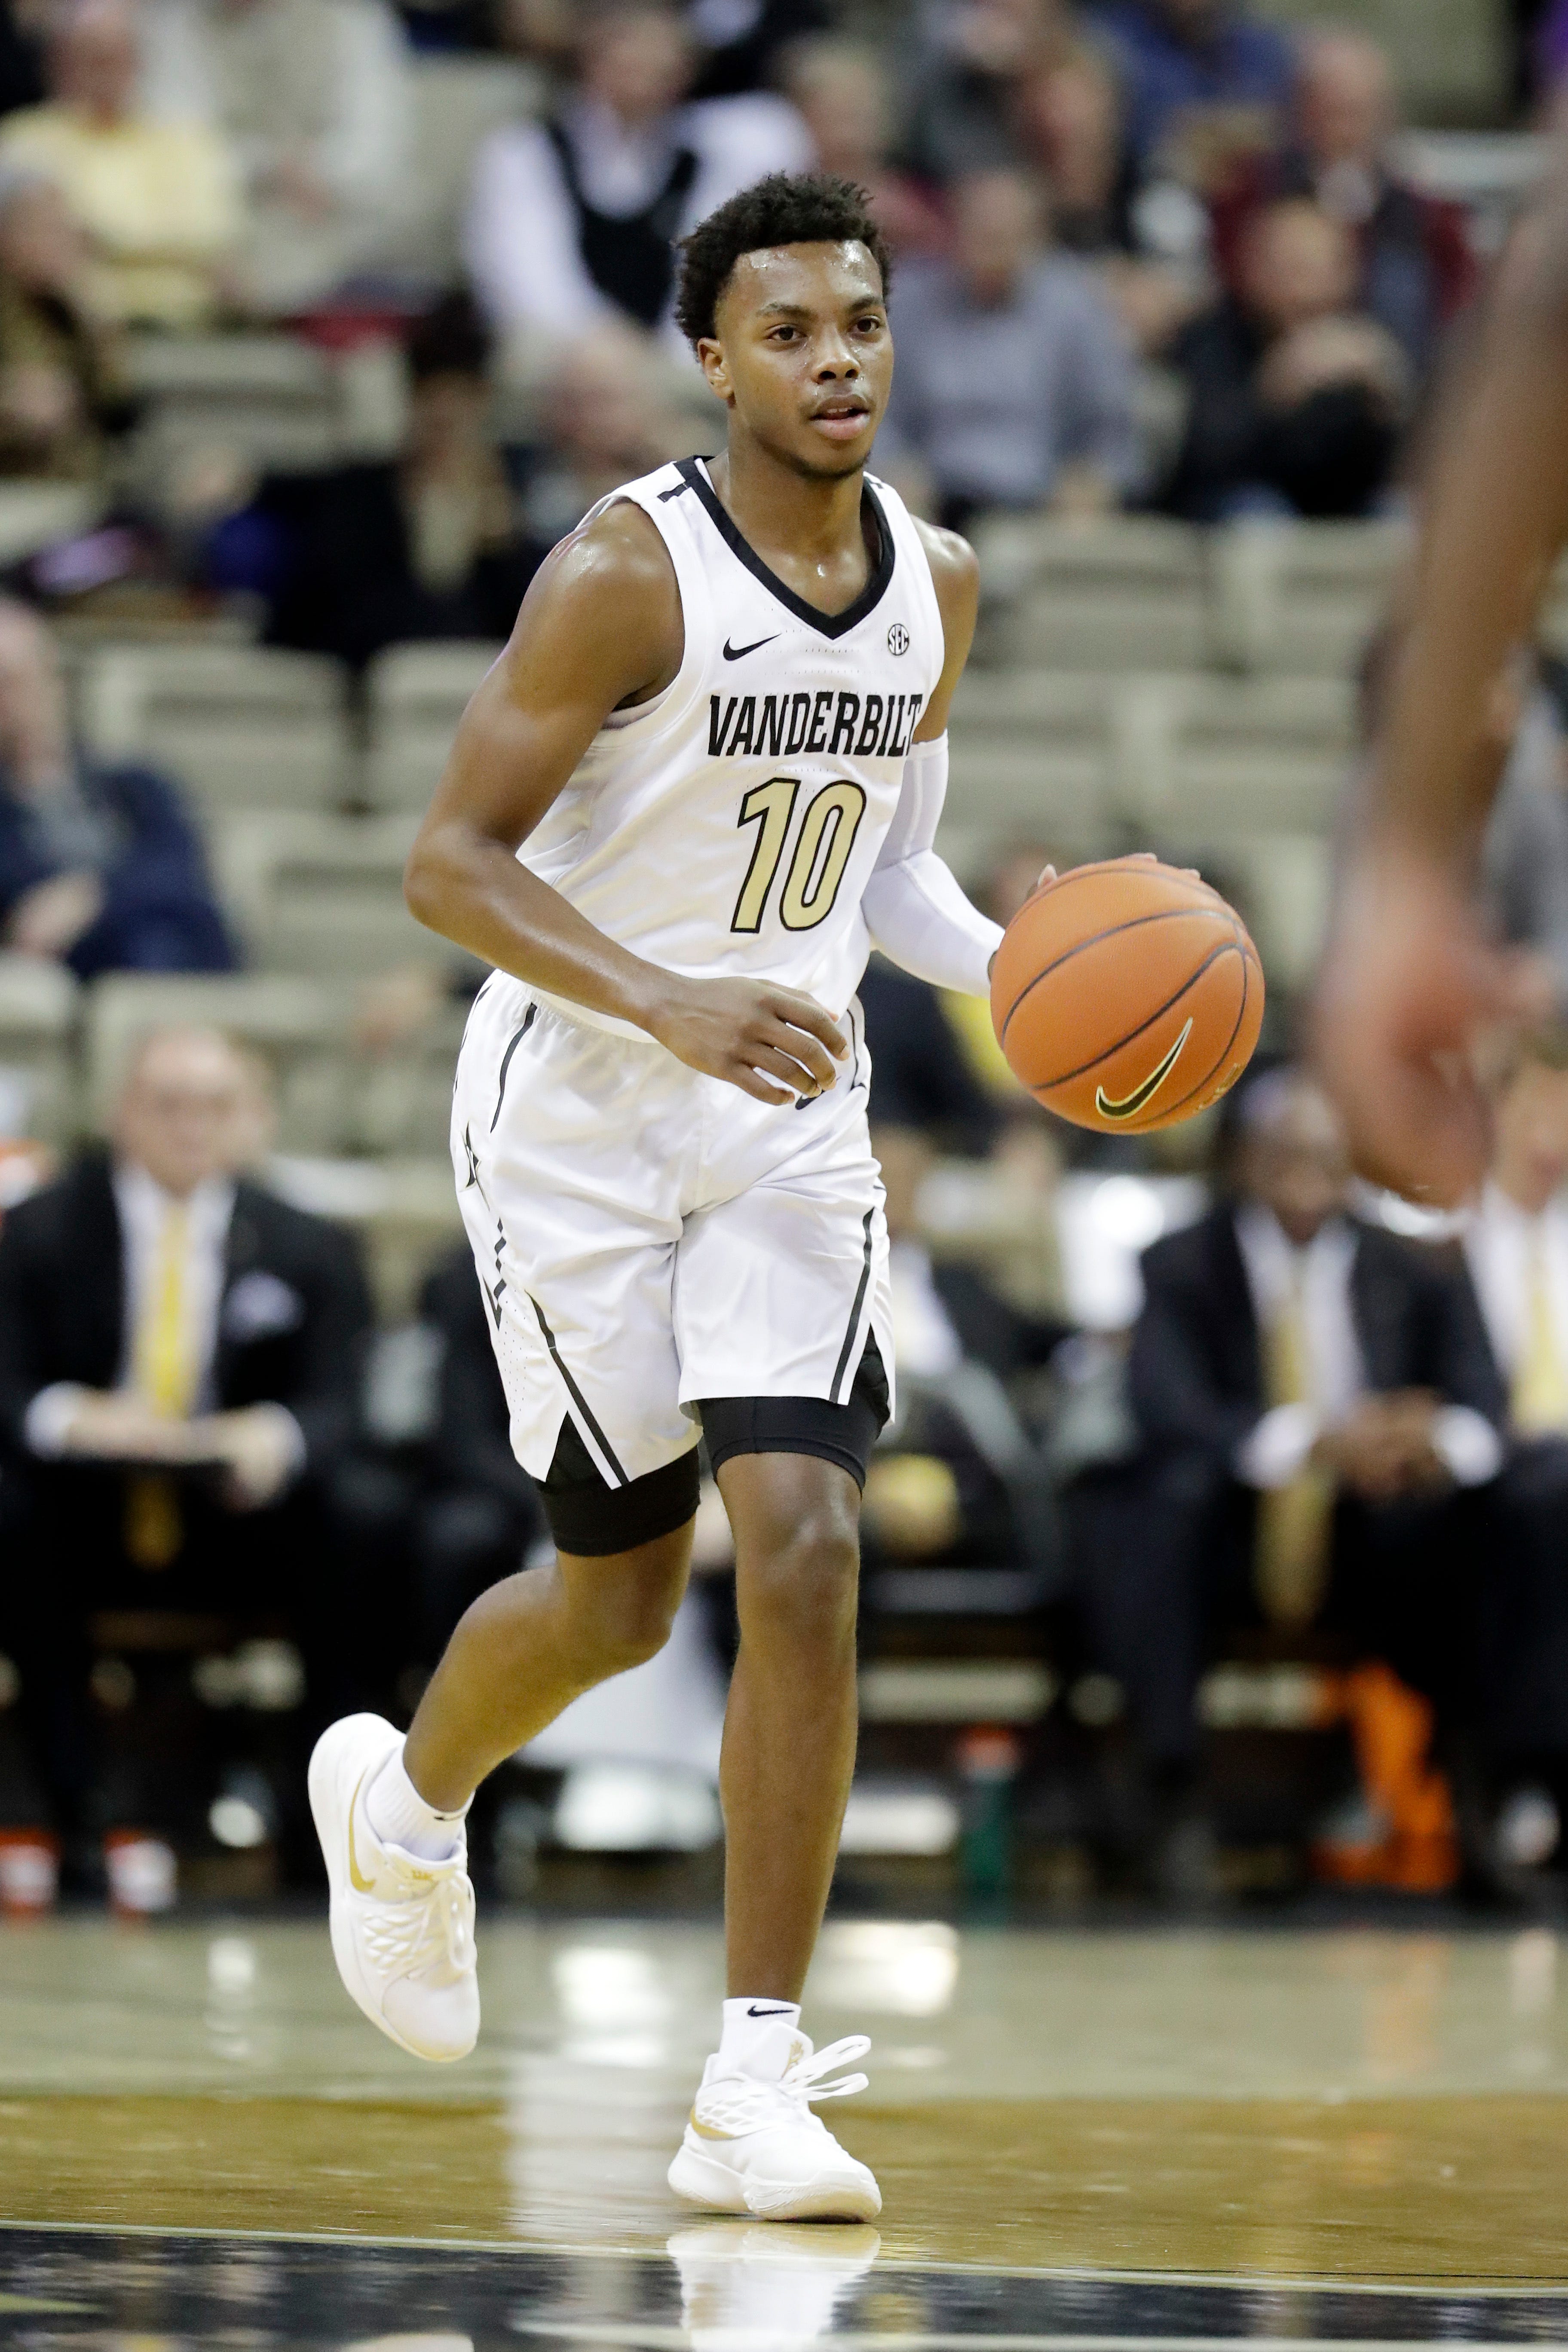 4. Los Angeles Lakers: Darius Garland, PG, Vanderbilt. Here’s where things could get interesting. The Lakers have some options and although they could look at De’Andre Hunter, the momentum is shifting to them taking a guard to pair with Lonzo Ball, which leads to Garland, a gifted ball-handler and playmaker.